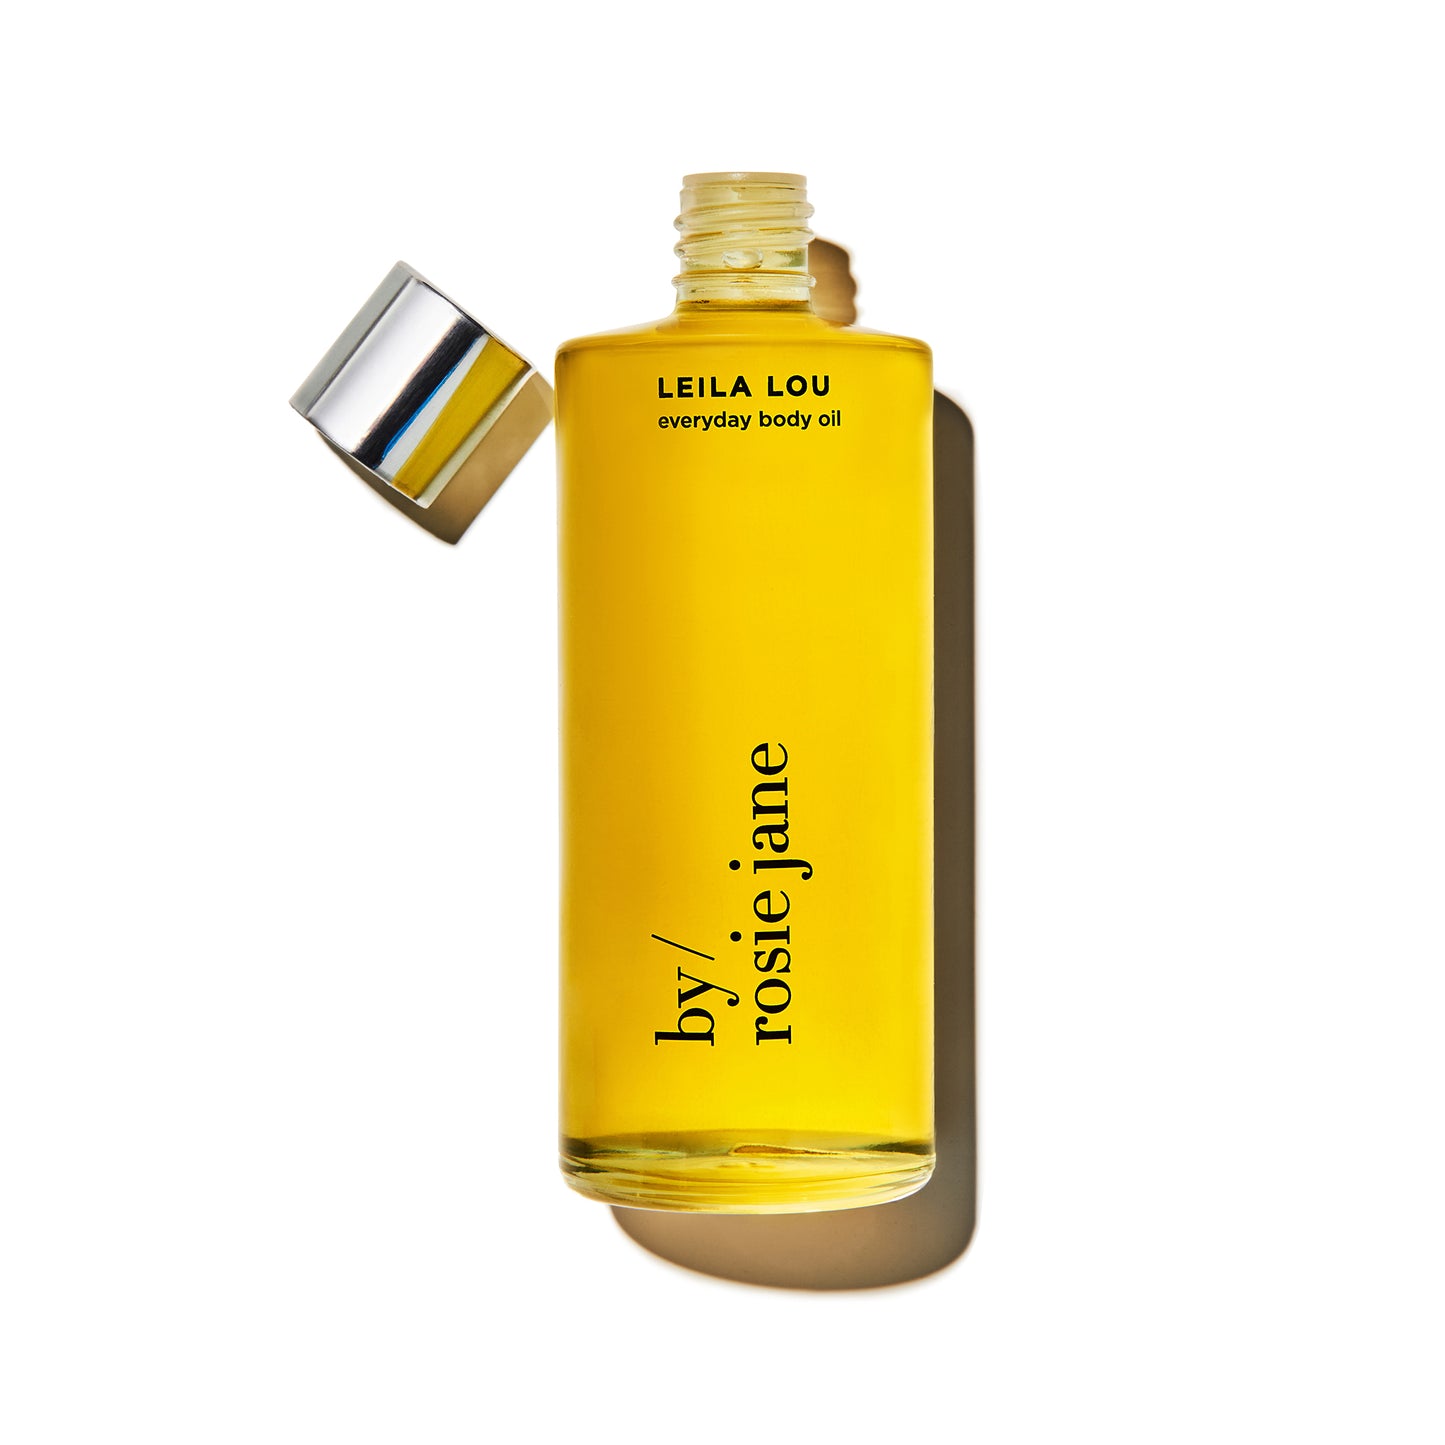 the leila lou everyday body oil without the lid.